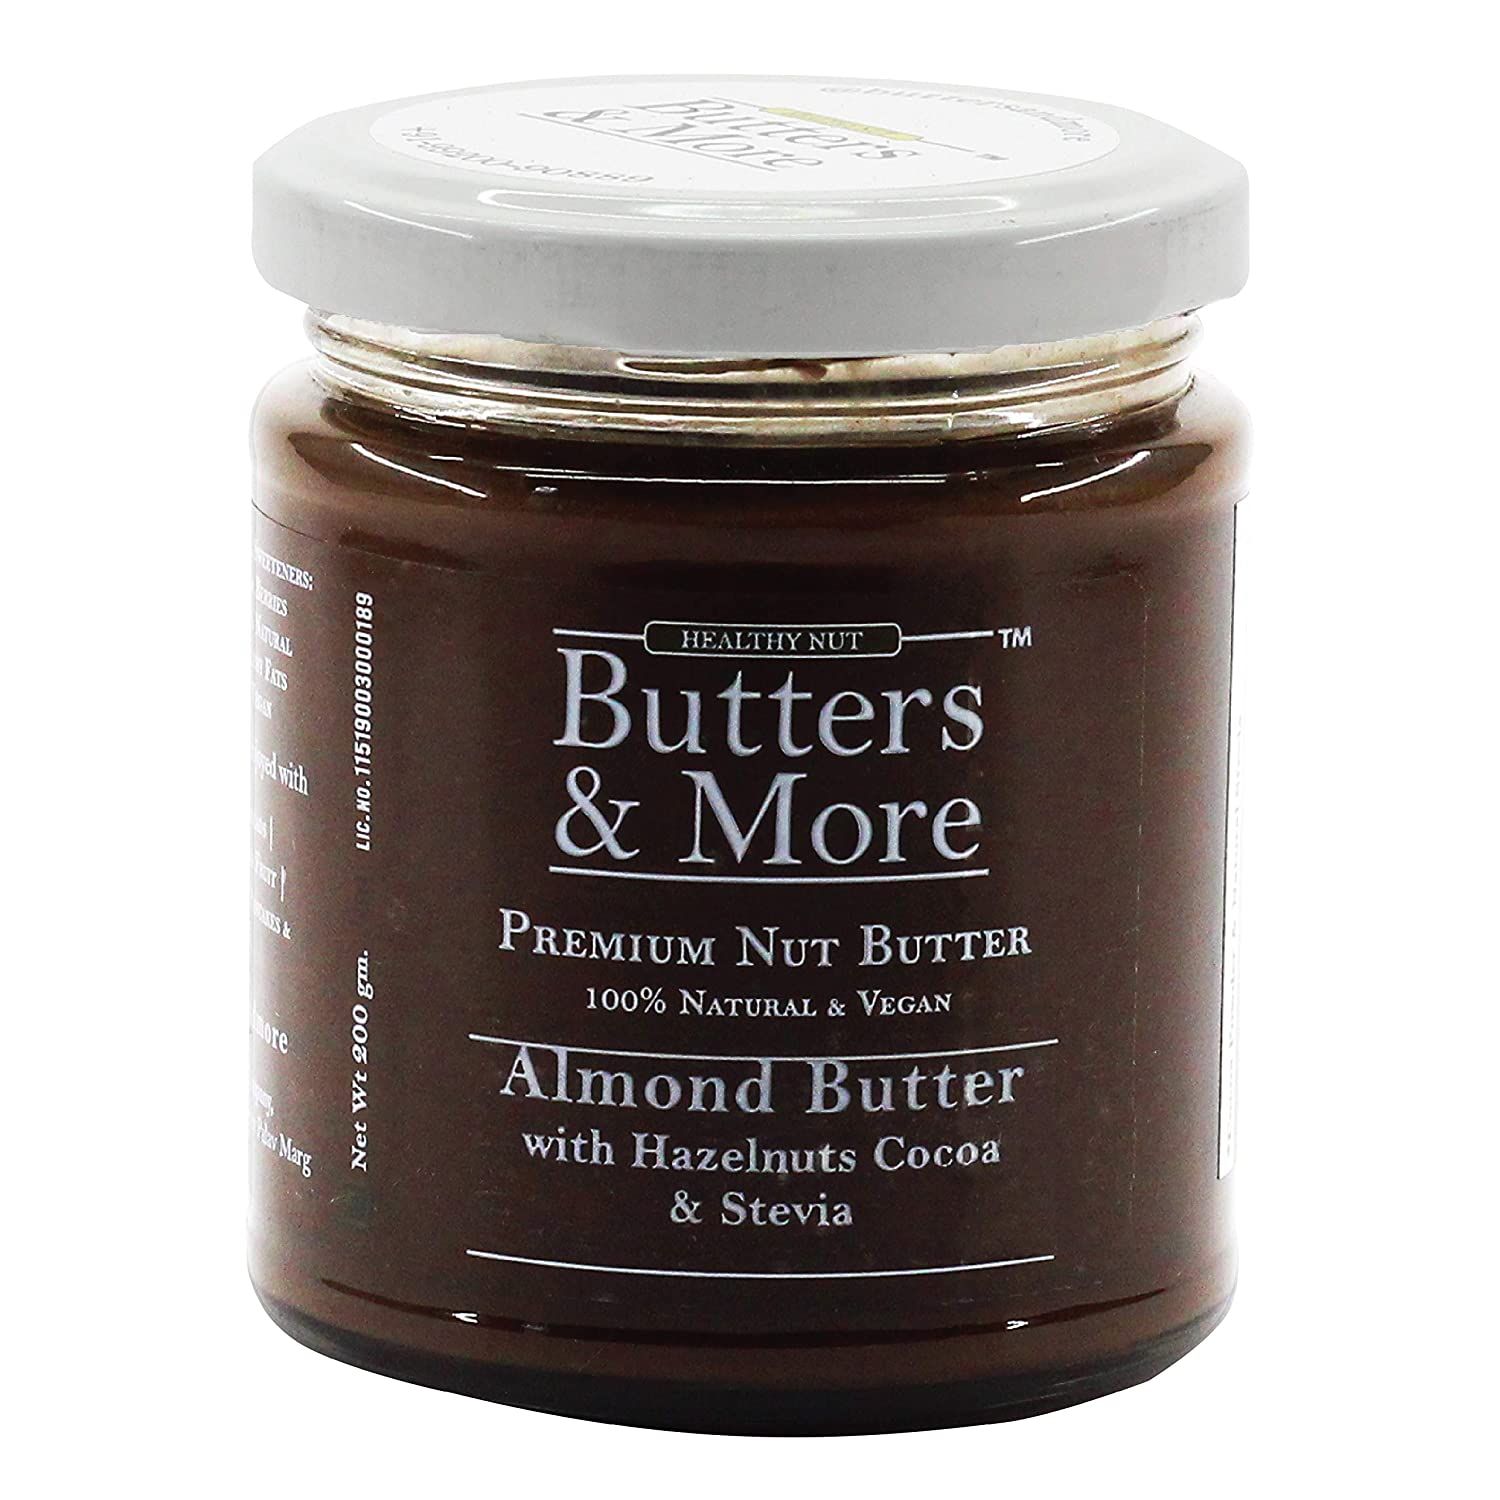 Butters & More Vegan Almond Butter With Hazelnuts, Dark Cocoa & Stevia Image